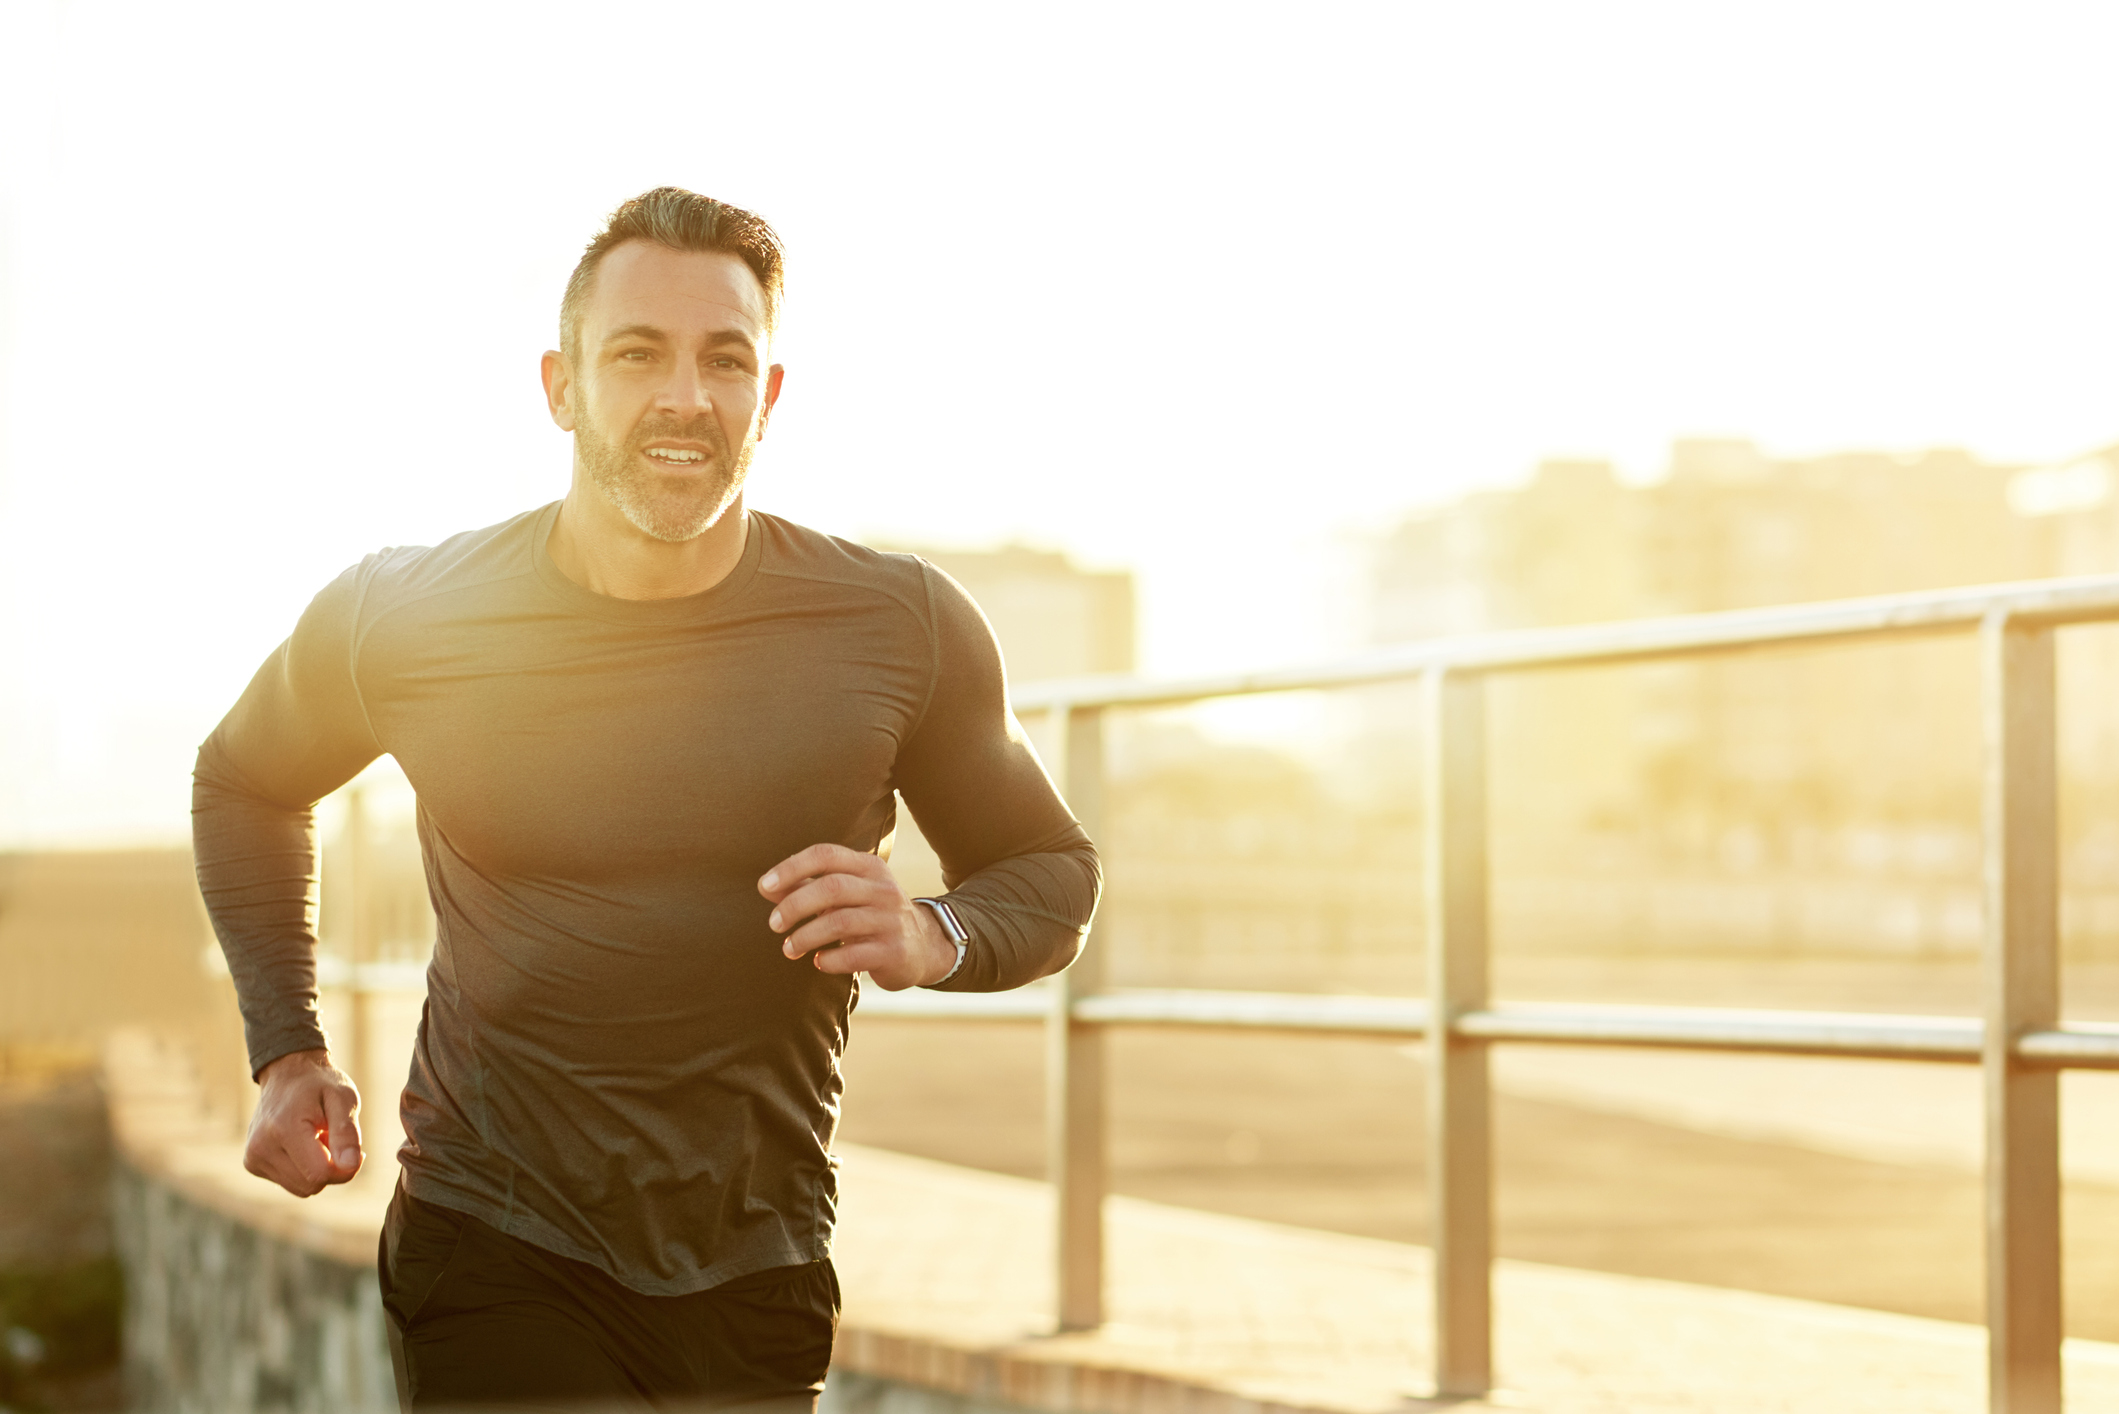 A man running during sunrise outdoors next to an elevated railing.